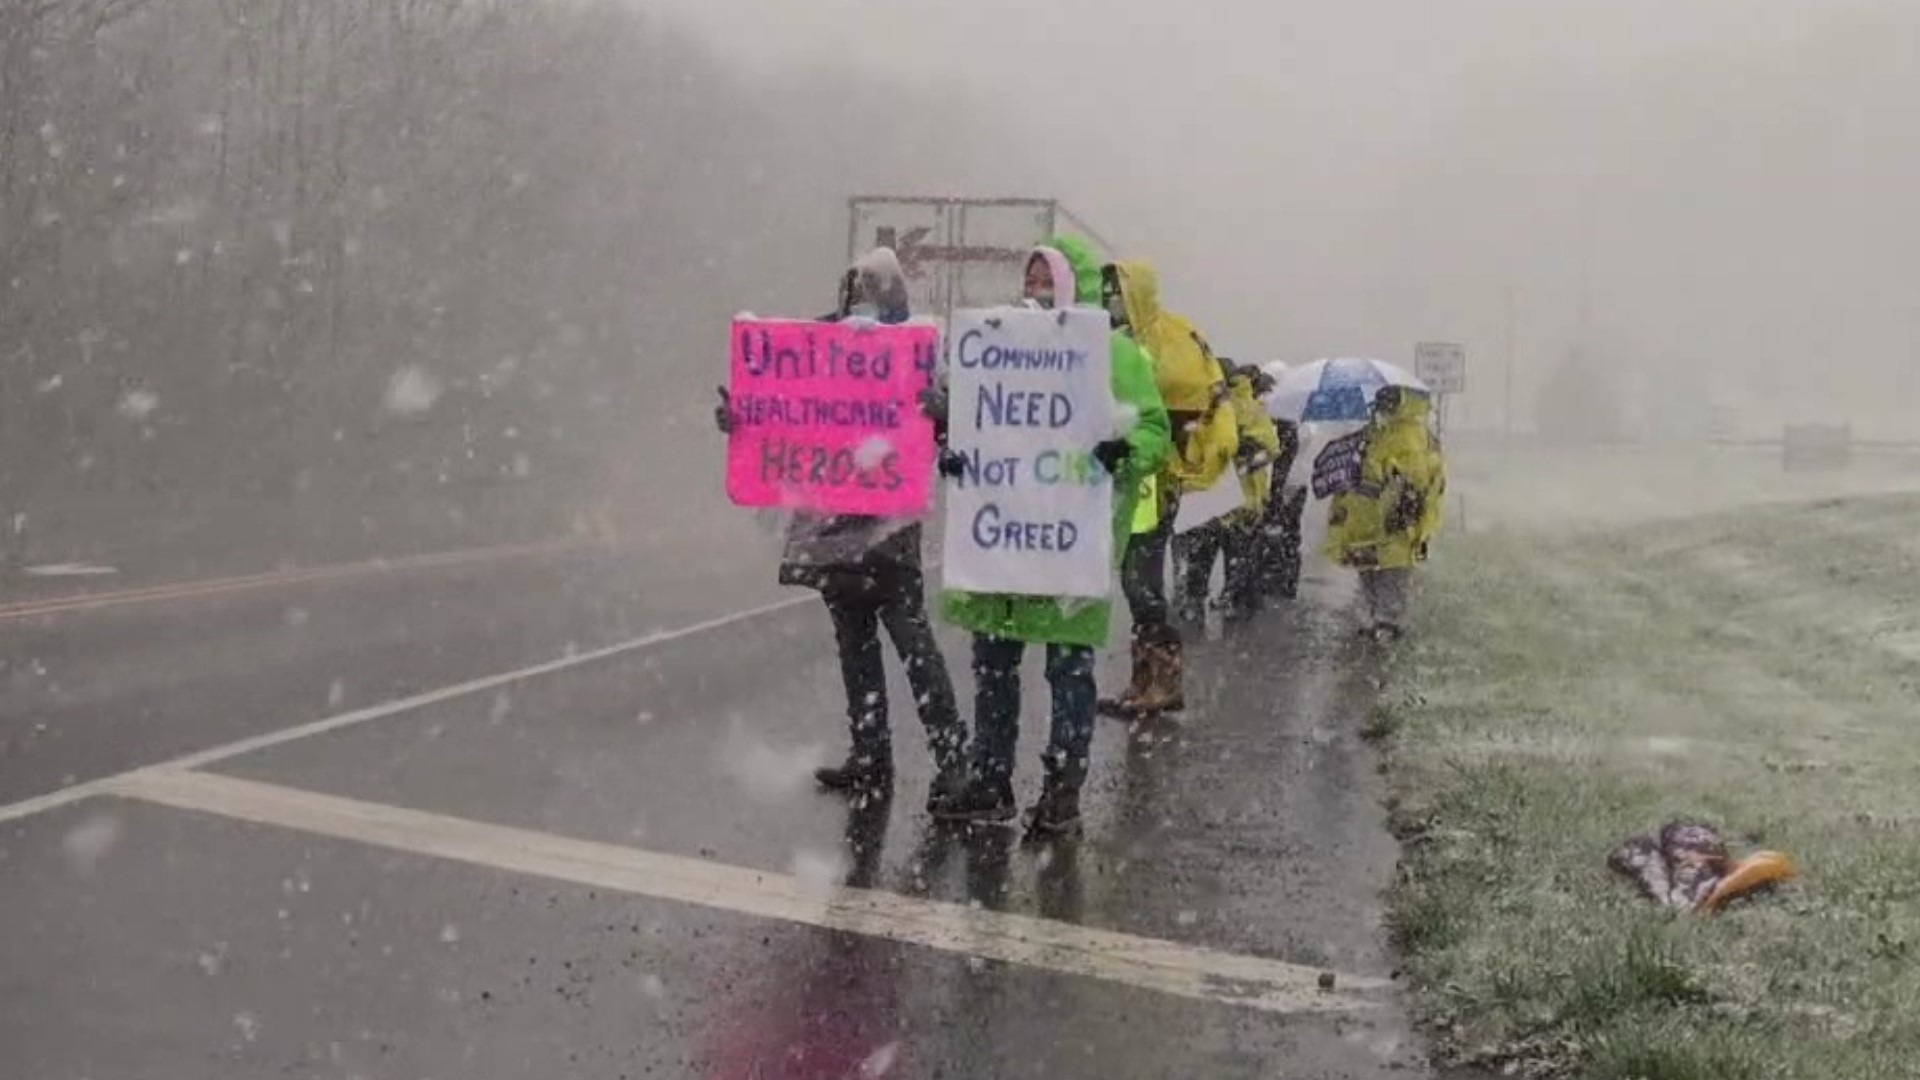 Hospital workers in Wyoming County braved the weather Wednesday to begin a three-day strike against unfair labor practices.